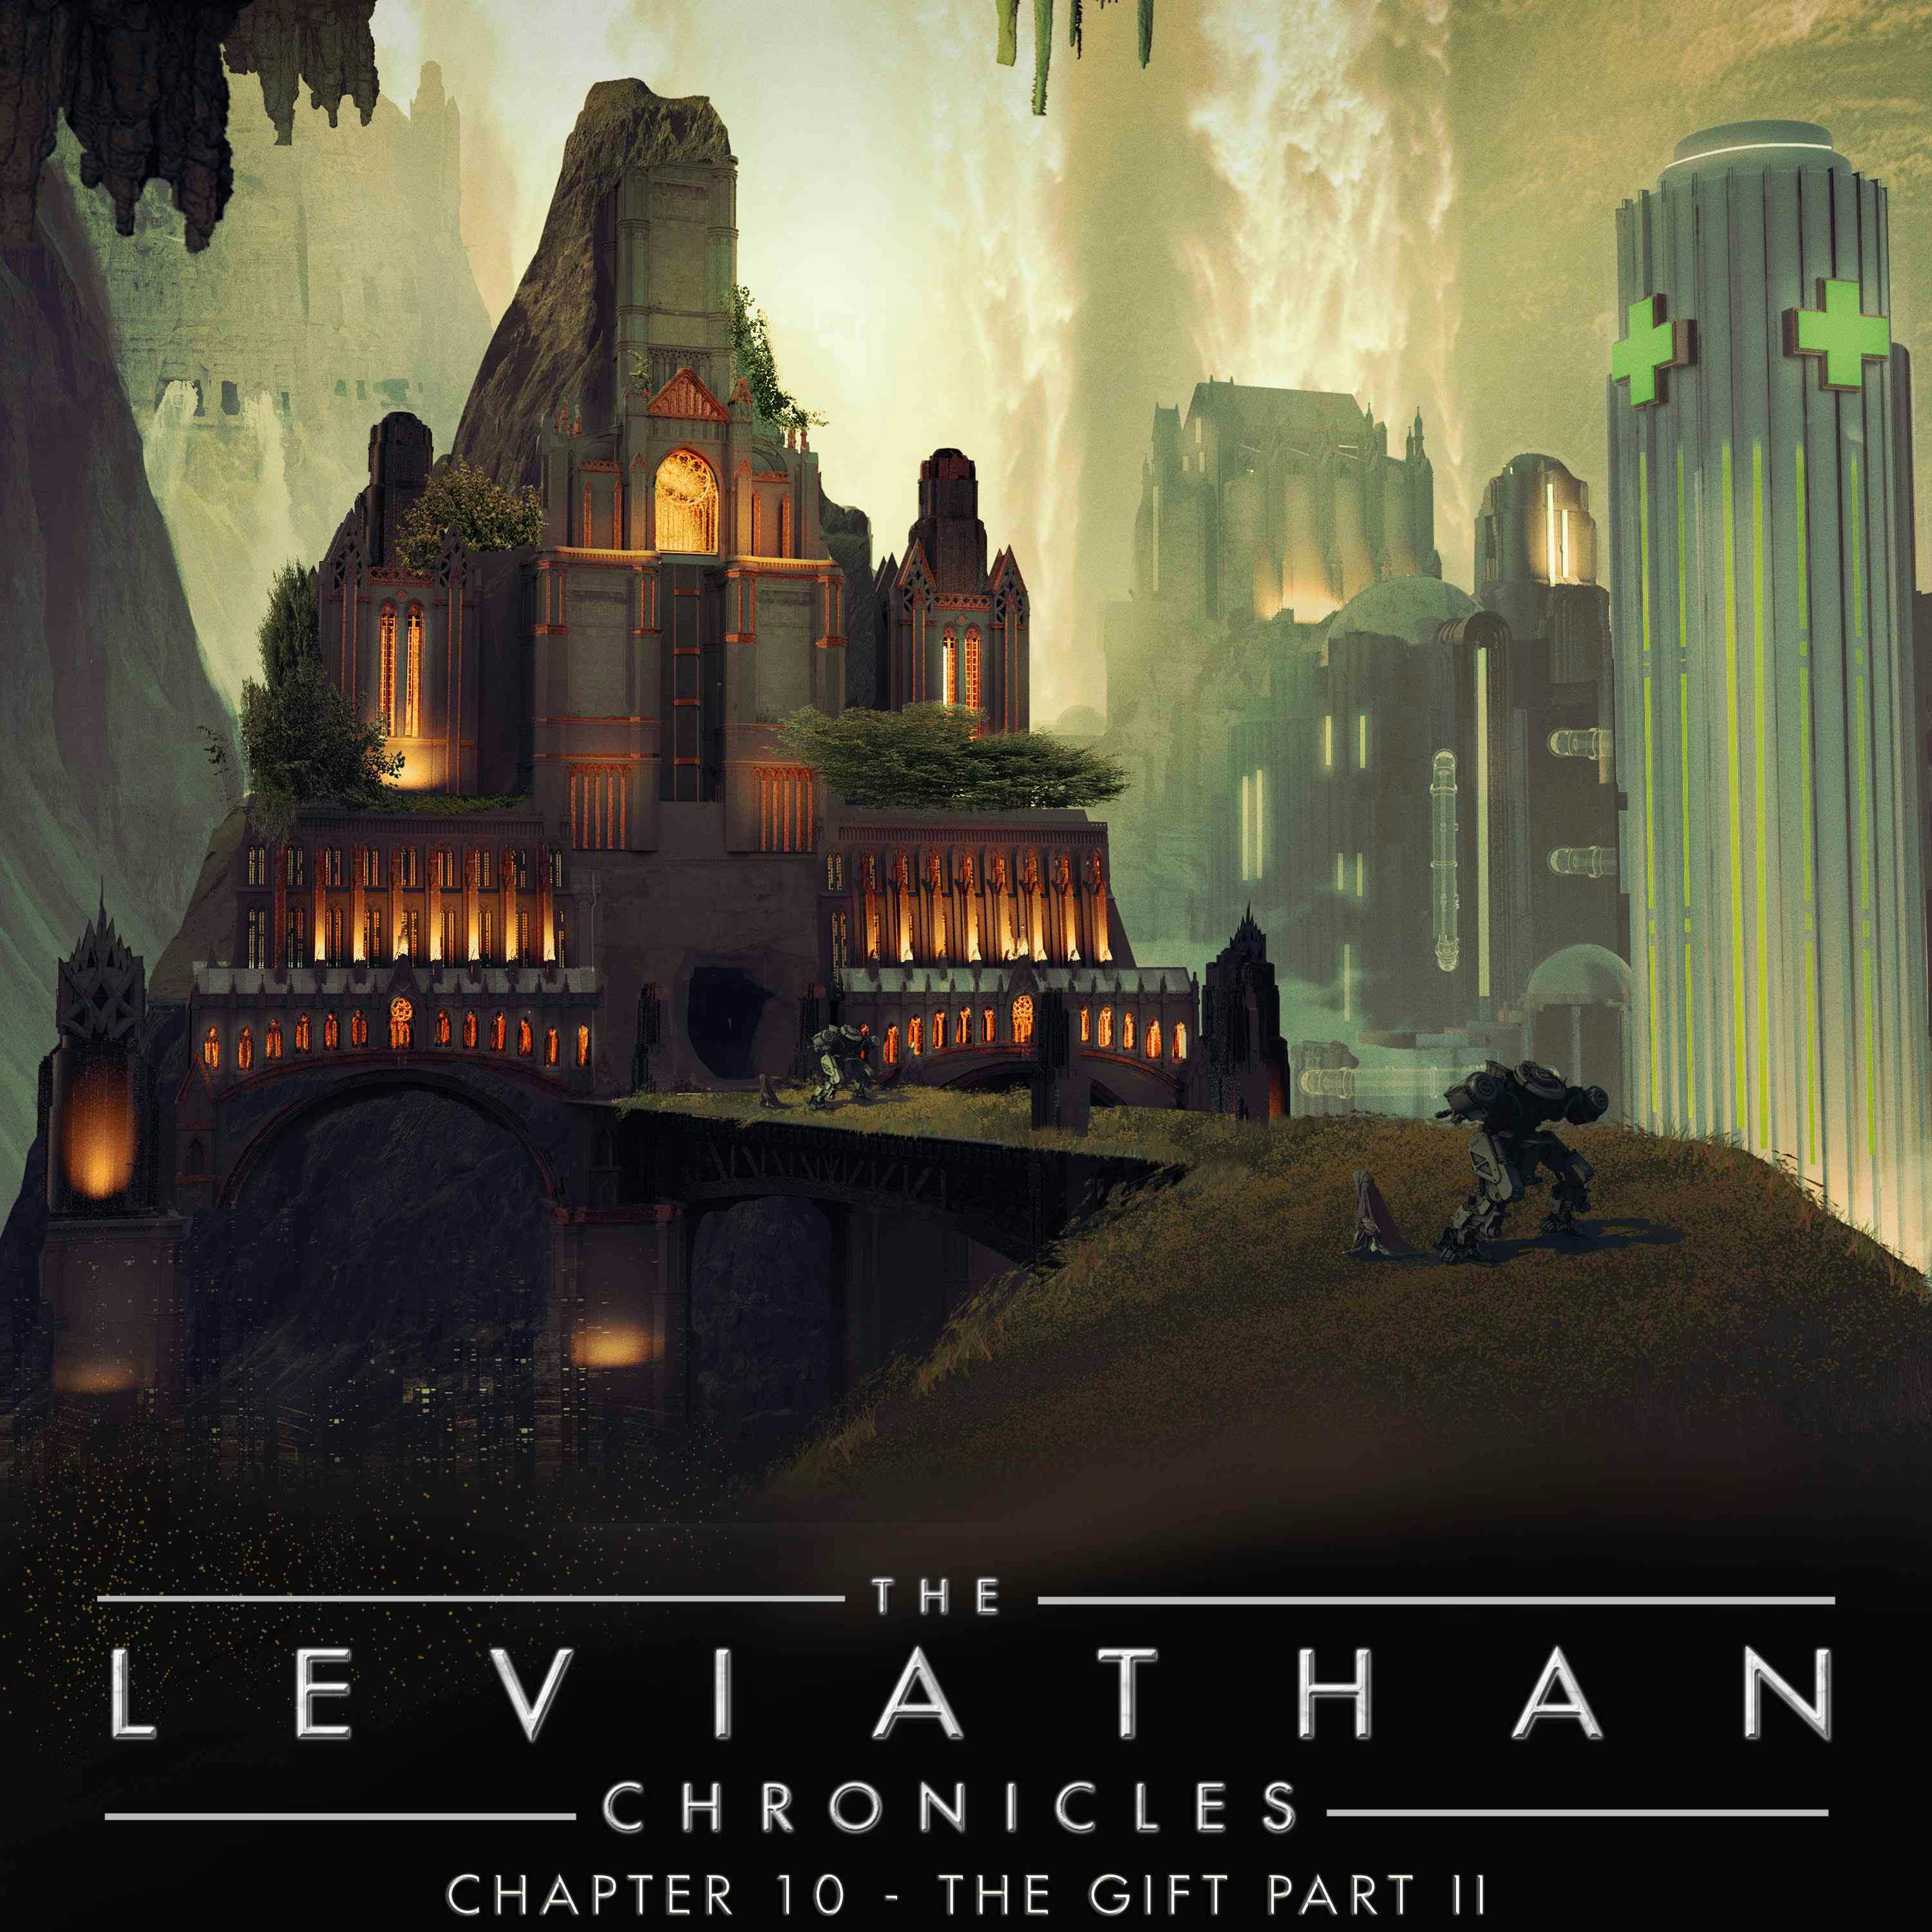 The Leviathan Chronicles | Chapter 10 - The Gift Part II